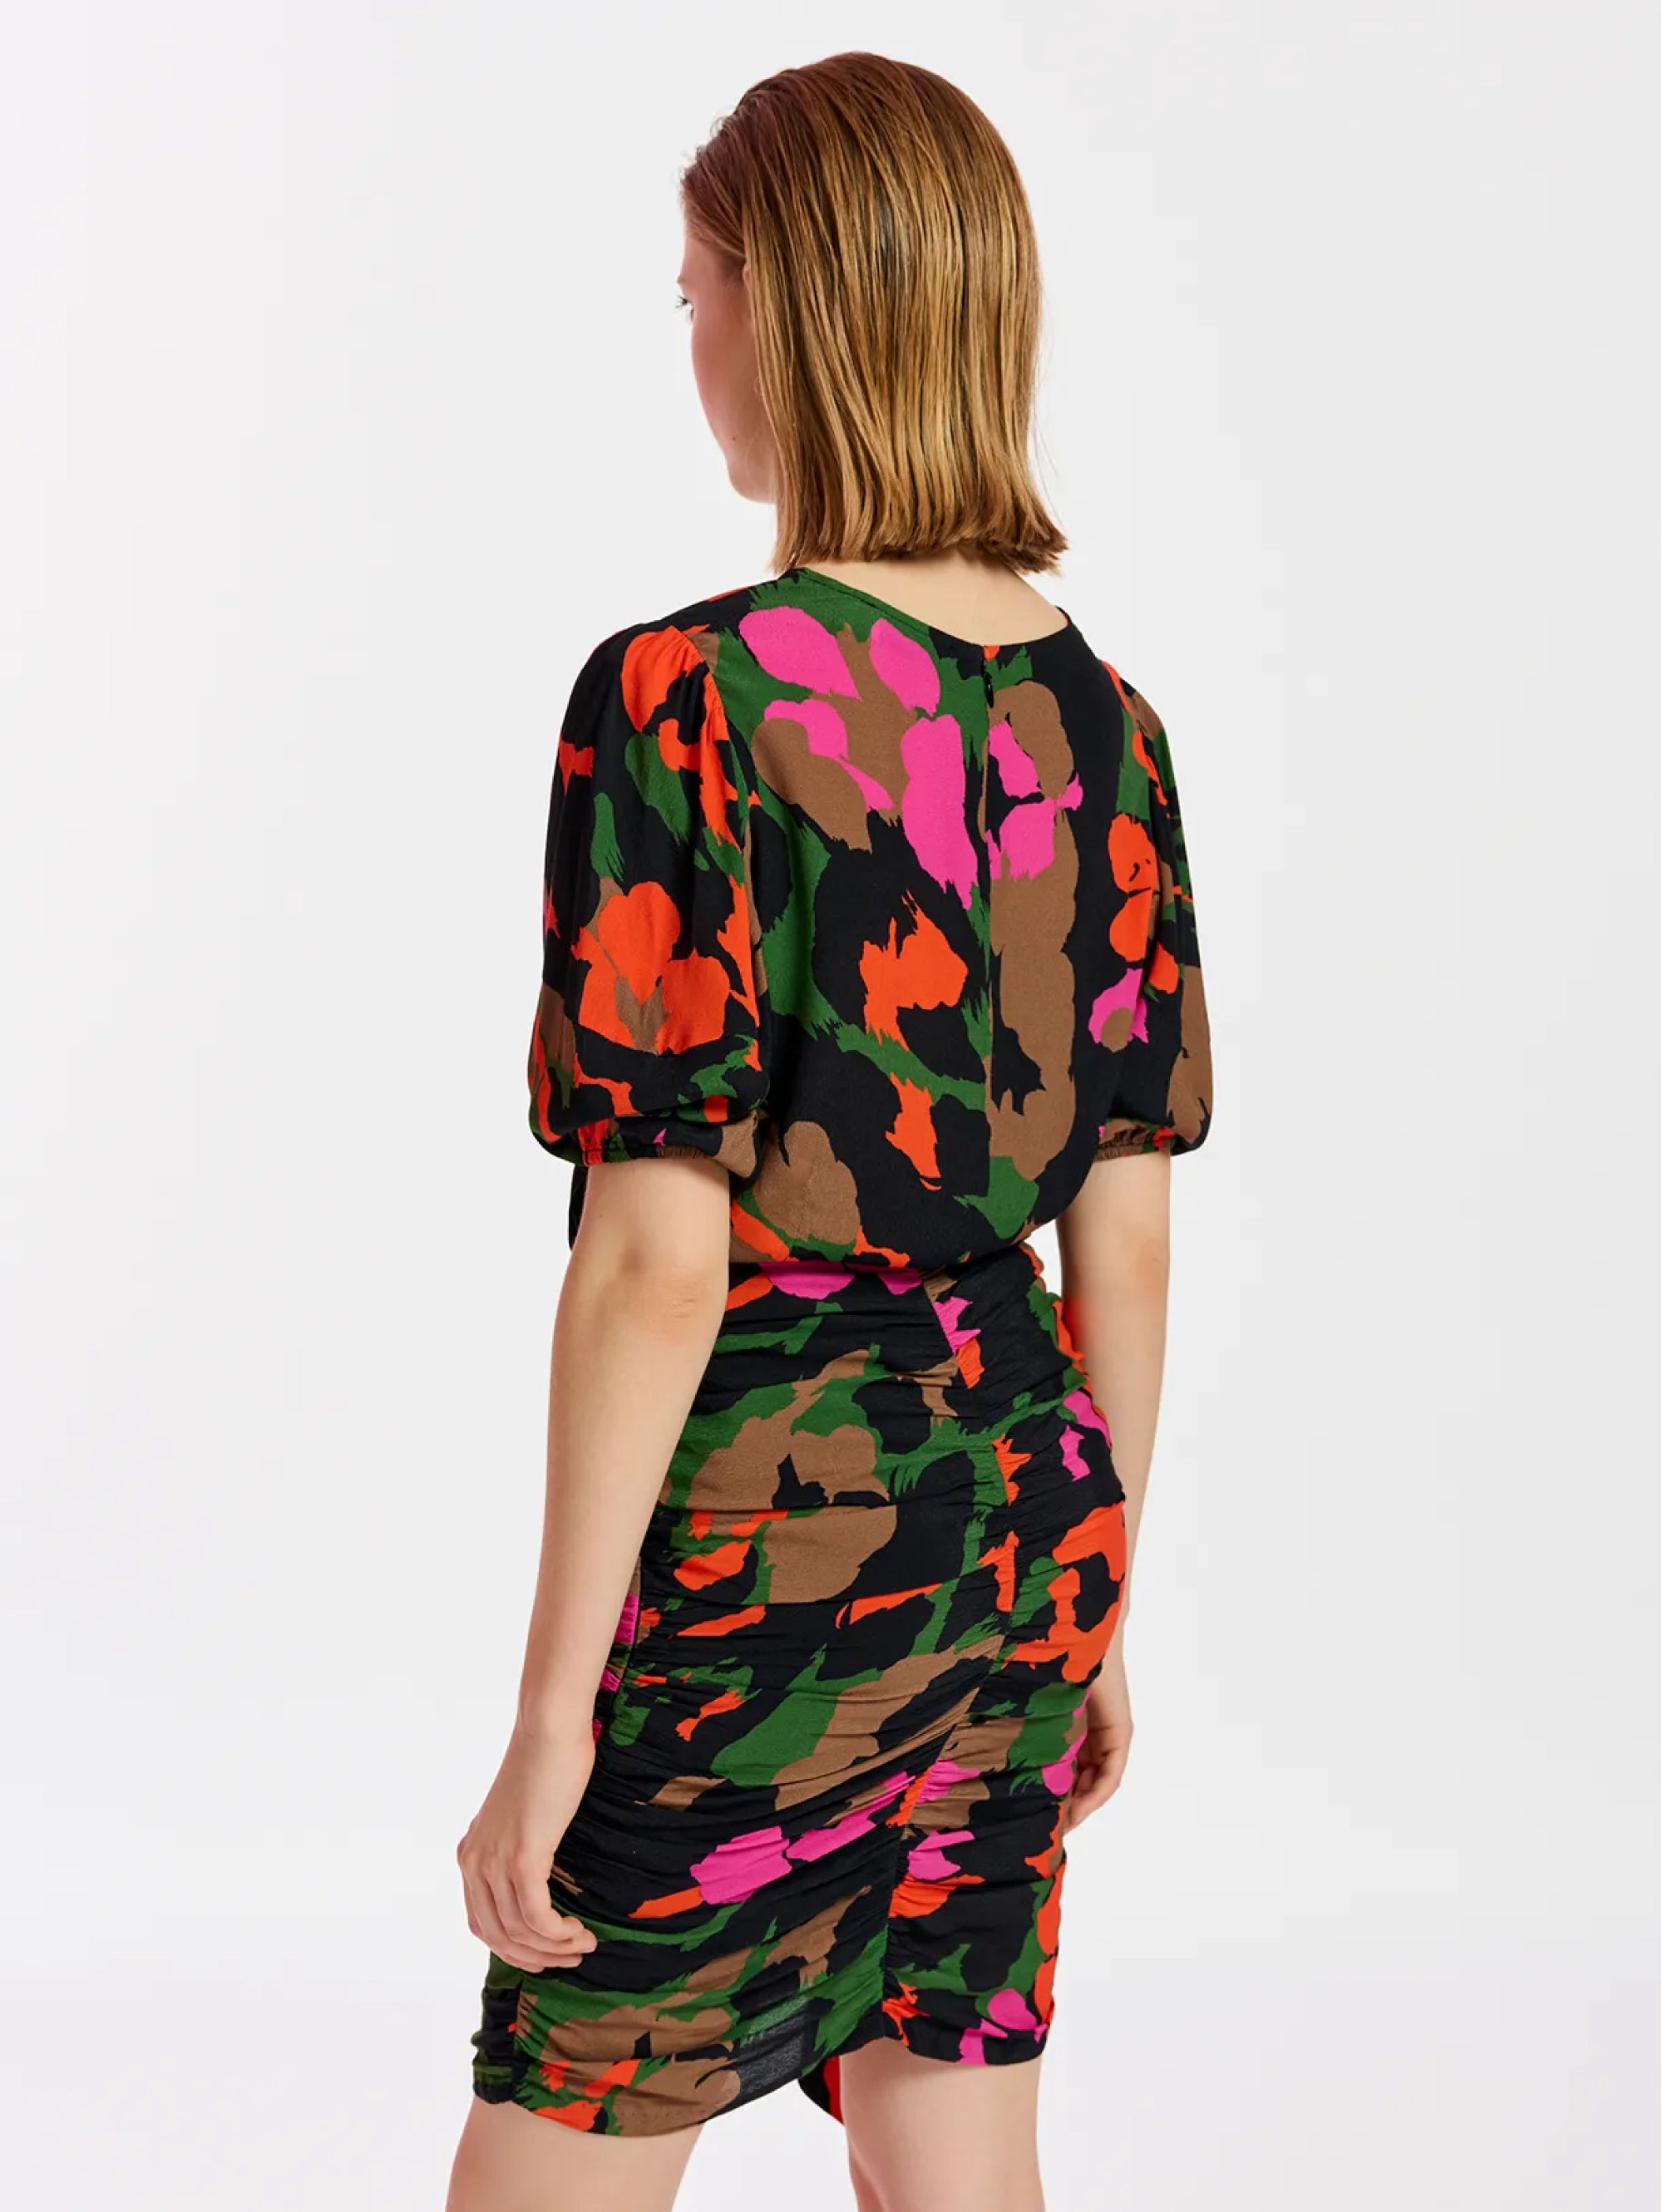 Mini dress with multicolored abstract print